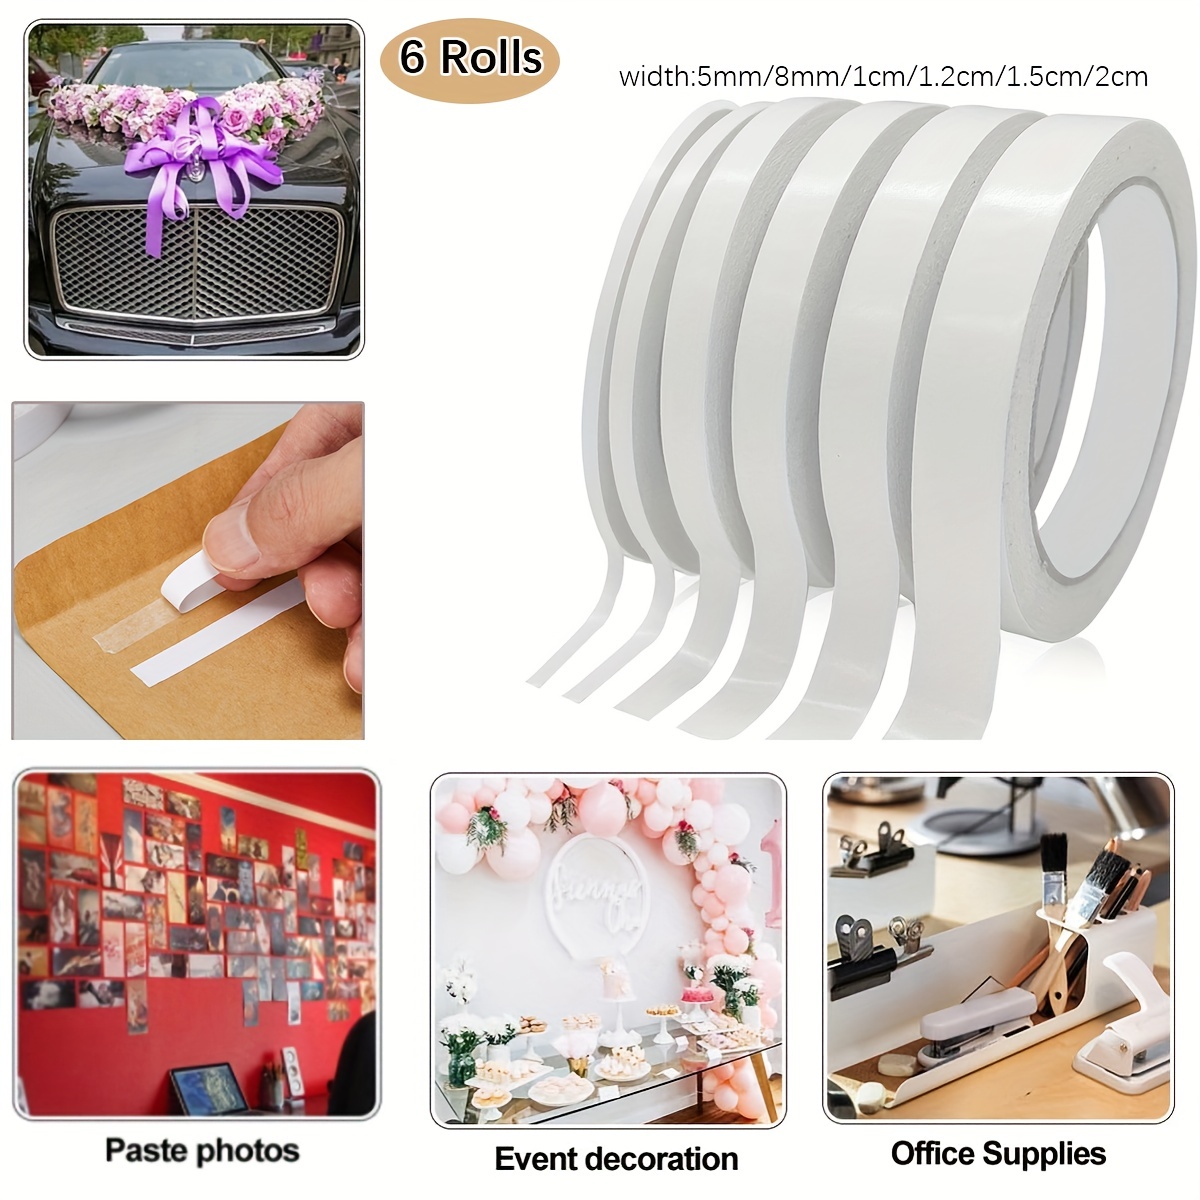 1roll Waterproof and Sweatproof Double-Sided Clothing Tape -  Multifunctional Self-Adhesive Strips for Secure Fitting and Comfortable Wear